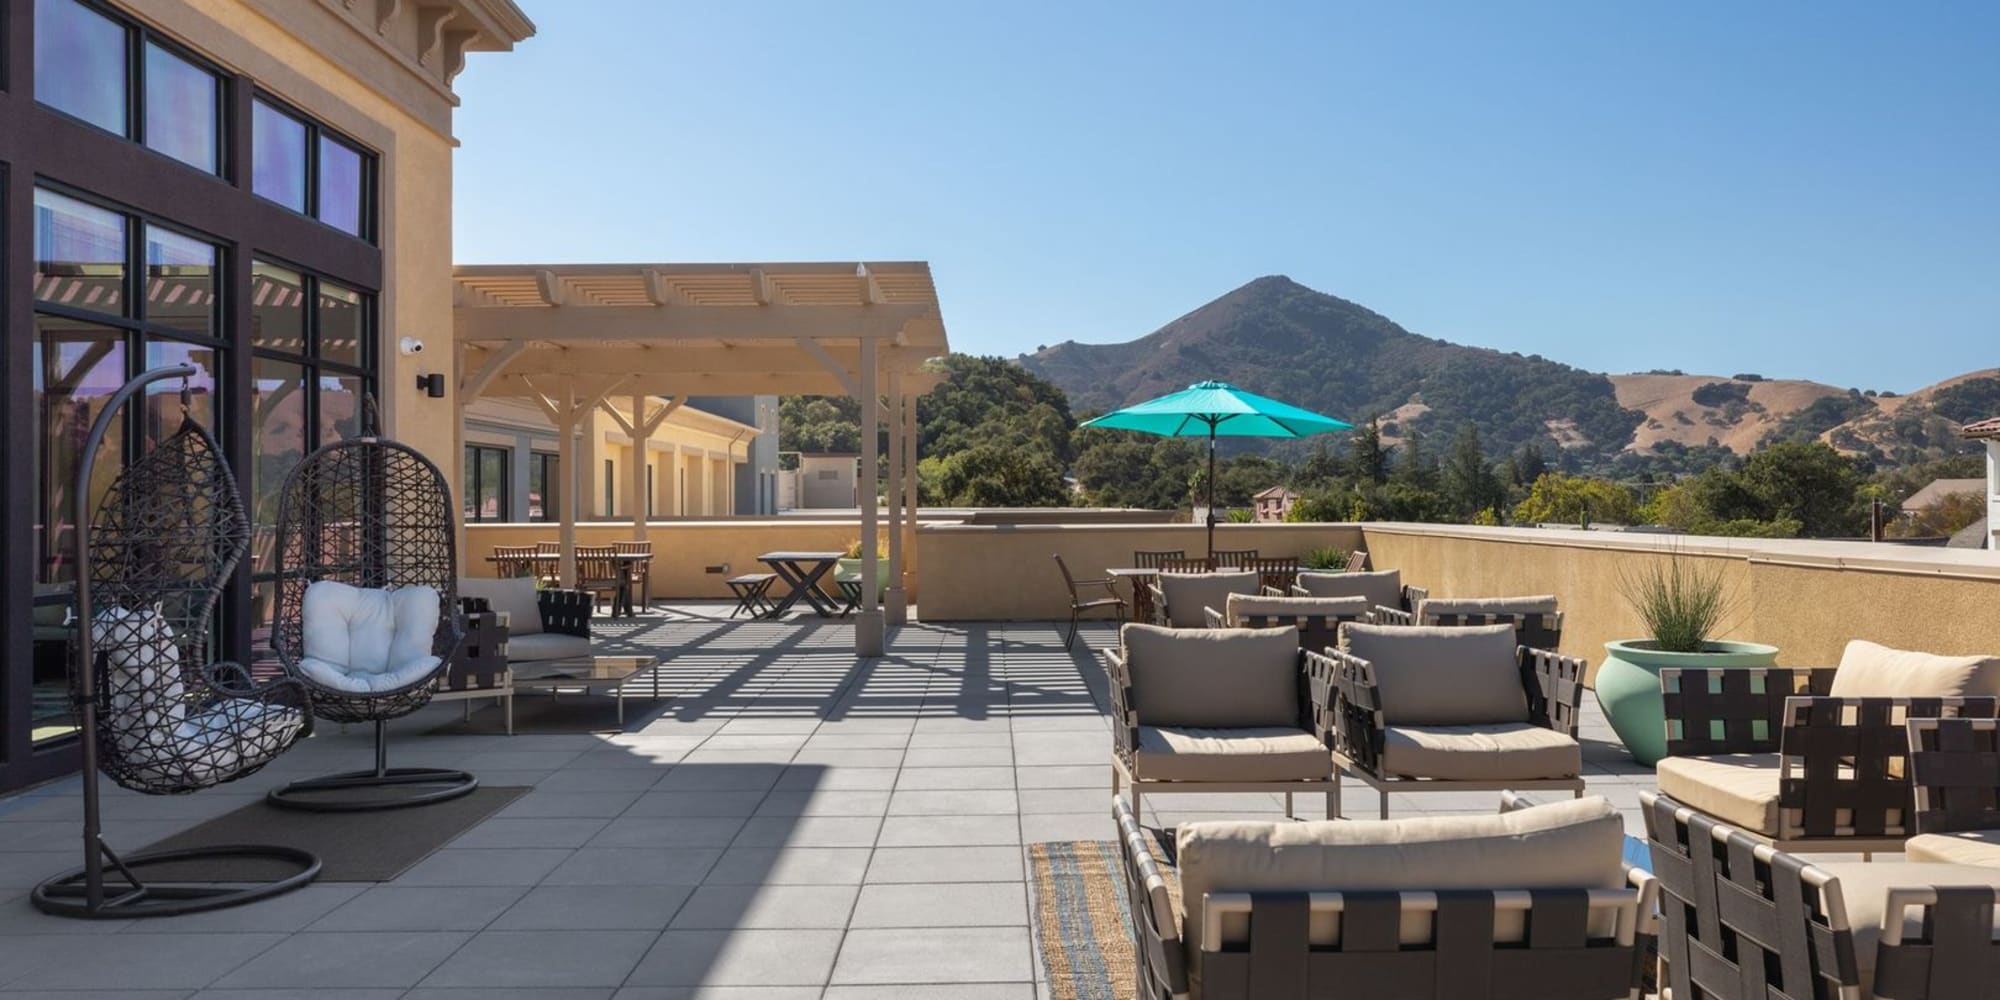 Outdoor common area at Sunsweet in Morgan Hill, California